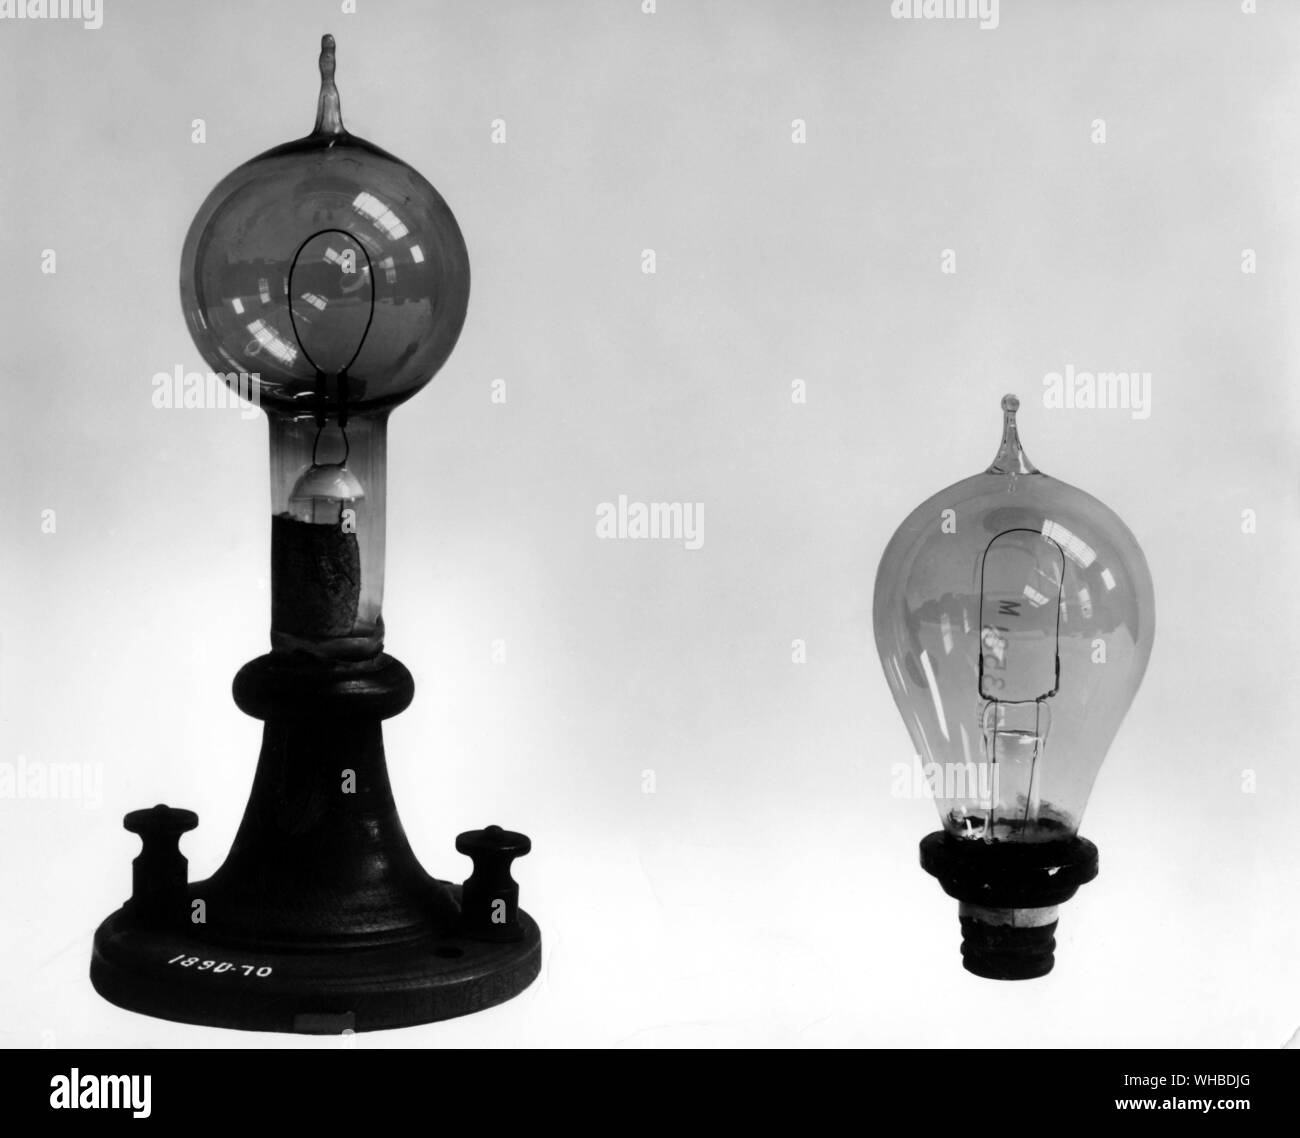 Swan experimental carbon pencil lamp 1878-9 - two early commercial types of lamp c.1880 - Made by the English chemist, Joseph Swan (1827-1914). This lamp is an early carbon and rod filament incandescent electric lamp. . Stock Photo